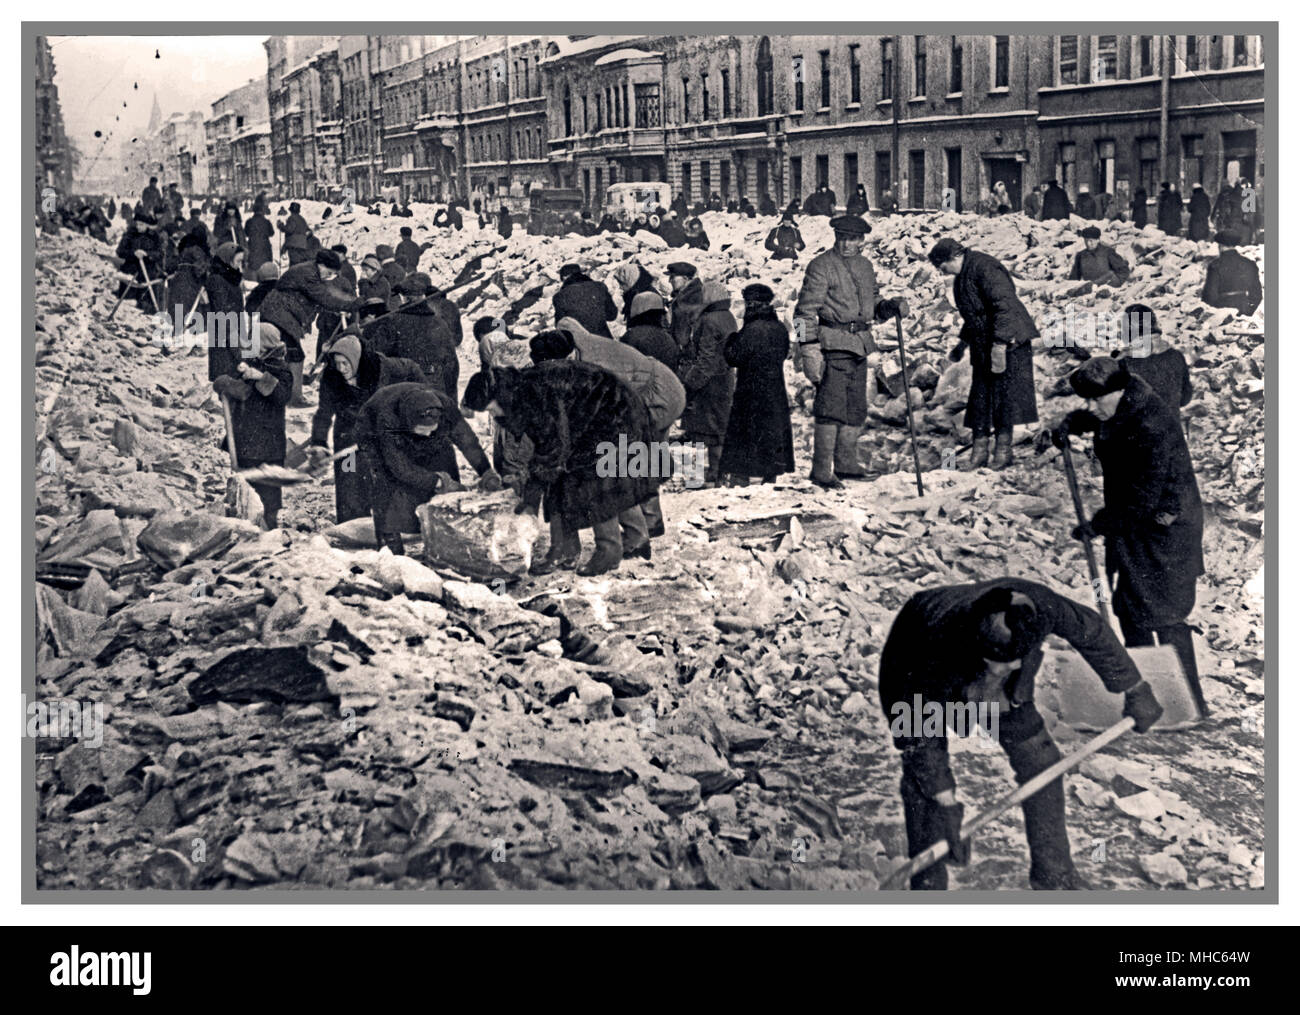 Leningrad siege Winter WW2 Residents with shovels clearing snow and ice blocks Nevsky Prospect Leningrad World War 2 Second World War Eastern Front Nazi aggression  1942 Stock Photo